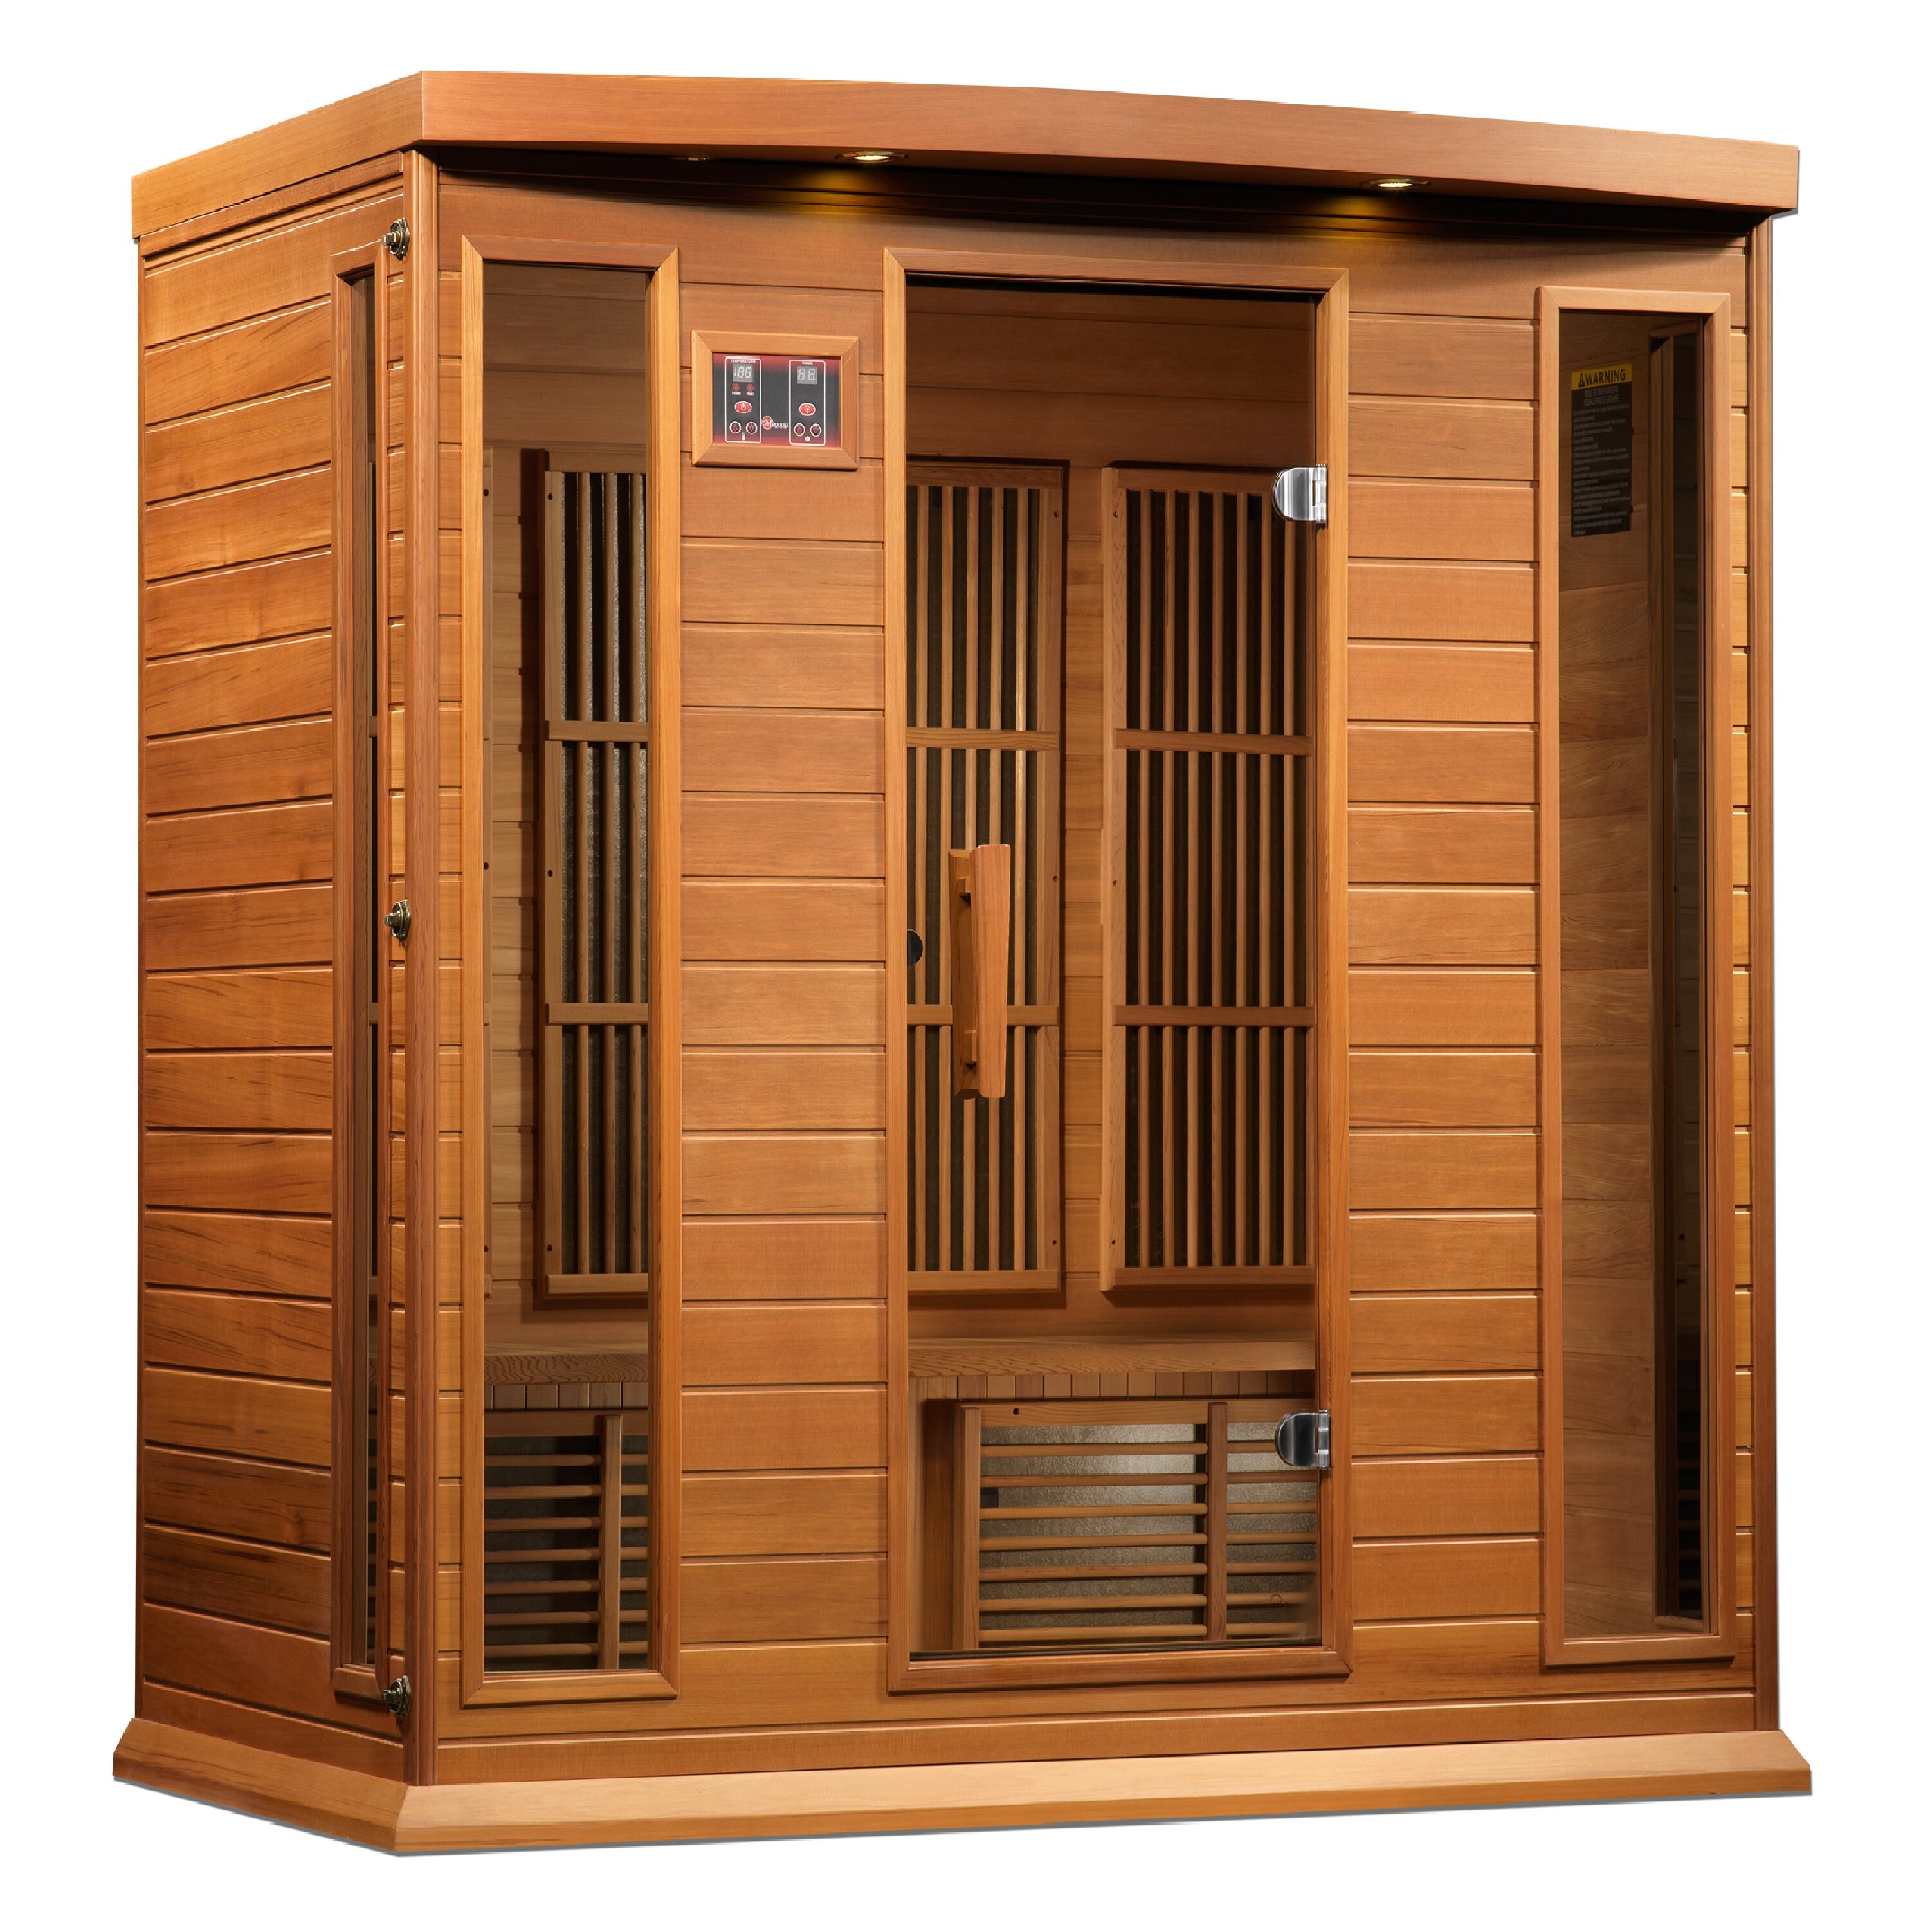 Sauna For Home, Infrared Saunas for Home Seats 4, Sauna For Home